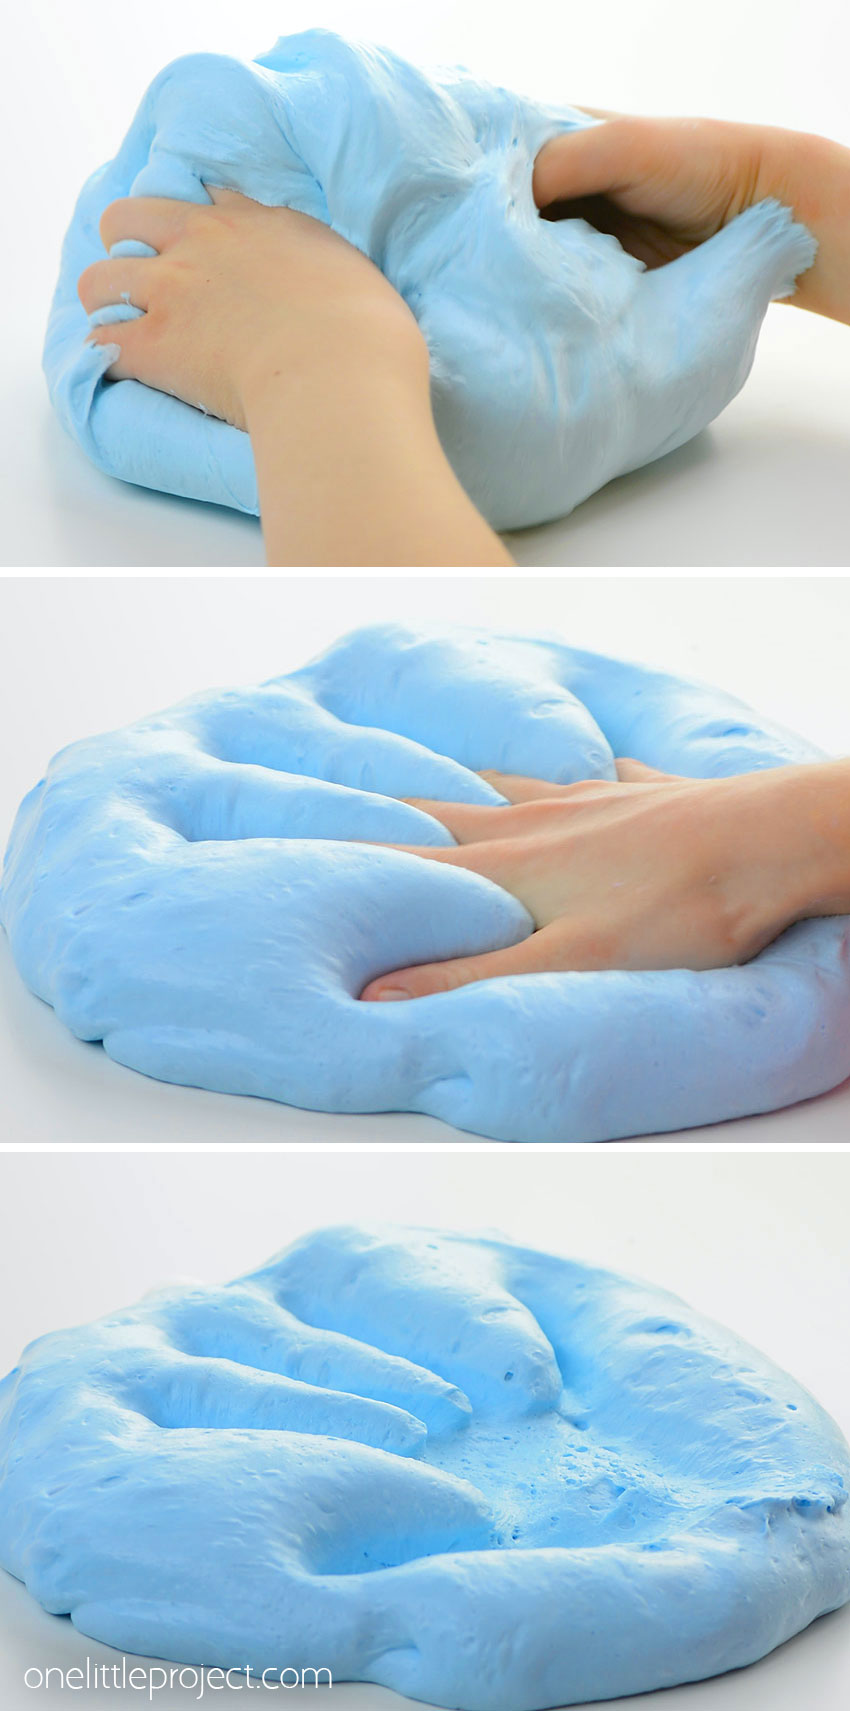 Playing with blue fluffy slime